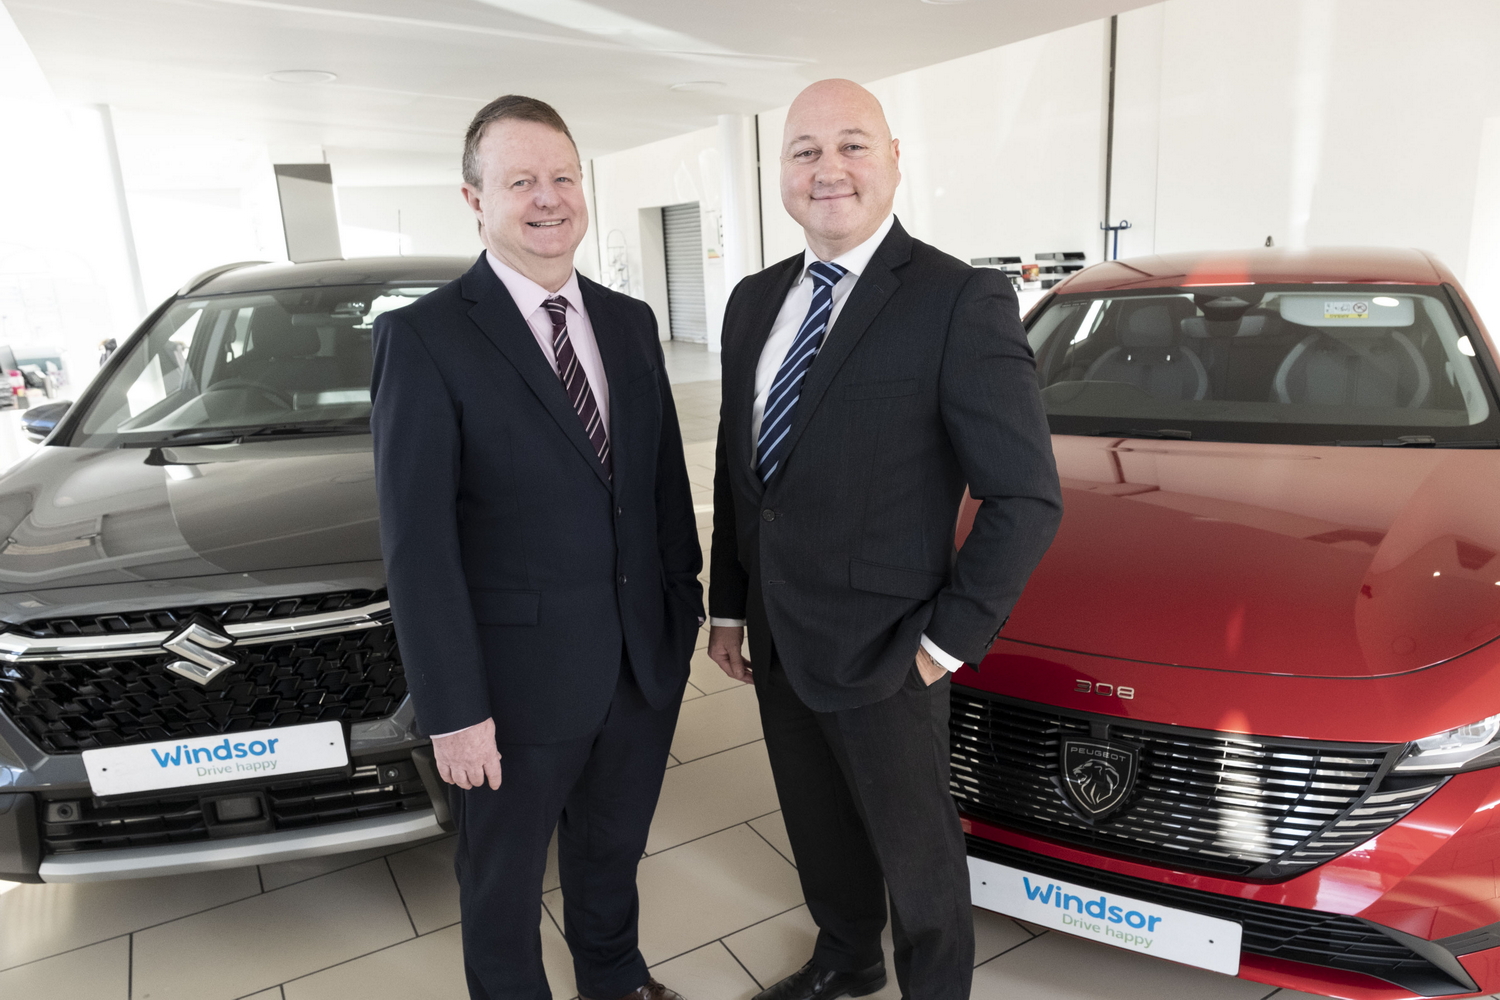 Car Industry News | Windsor Group expands again | CompleteCar.ie